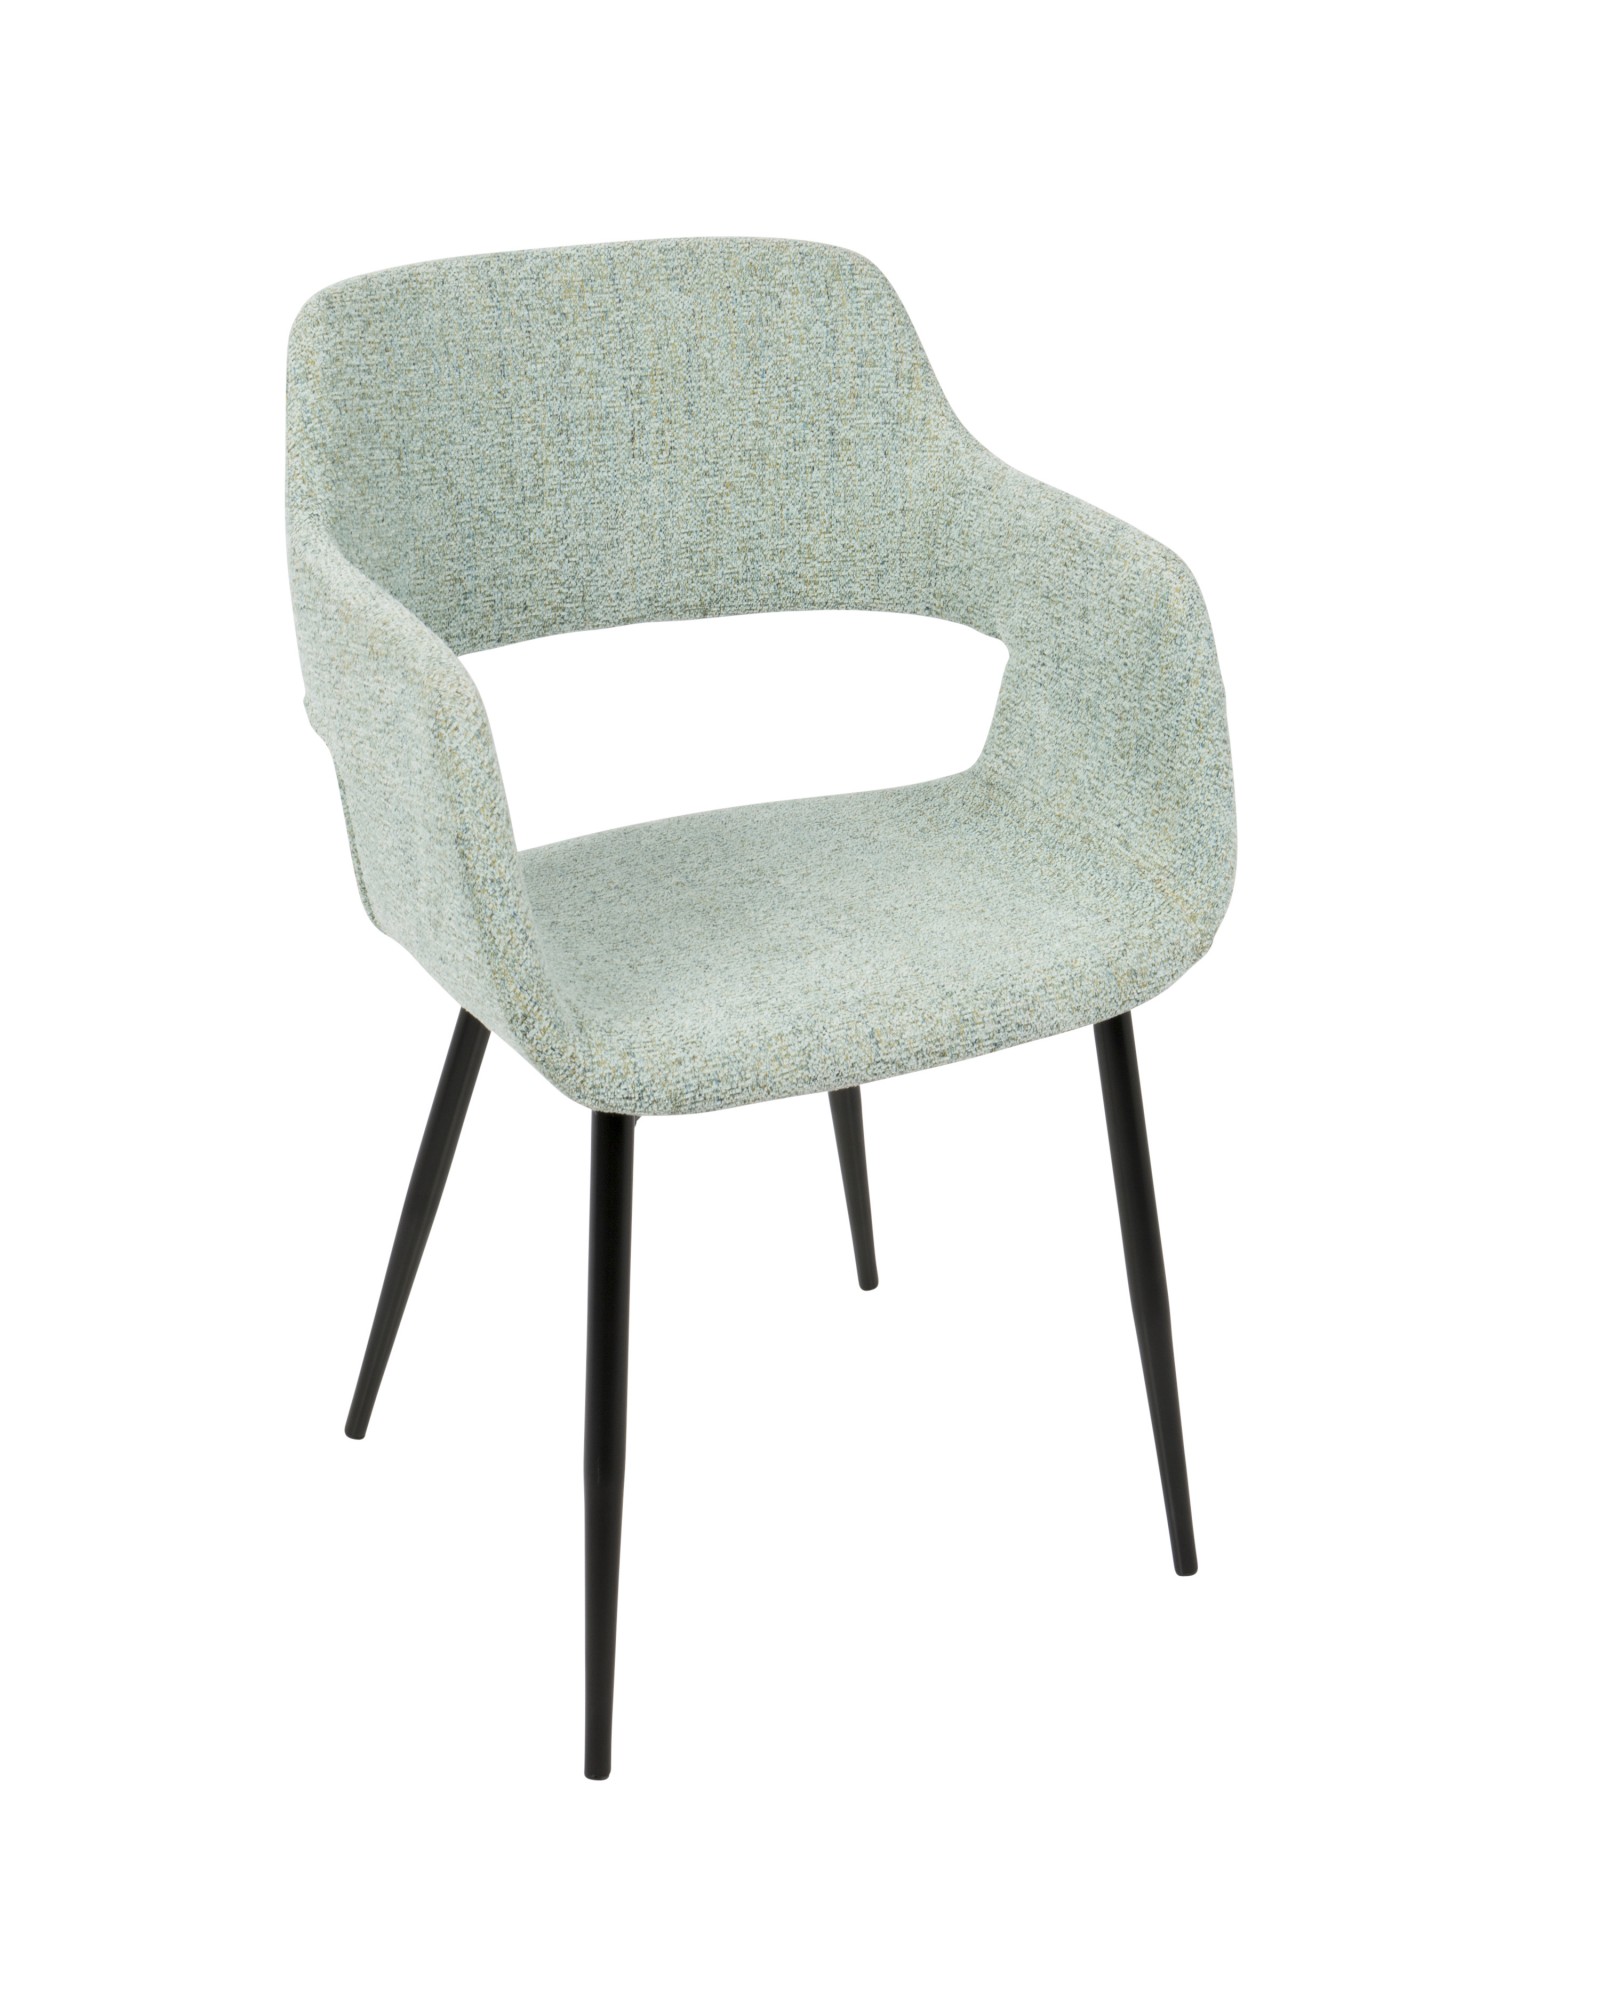 Margarite Mid-Century Modern Dining/Accent Chair in Black with Light Green Fabric - Set of 2